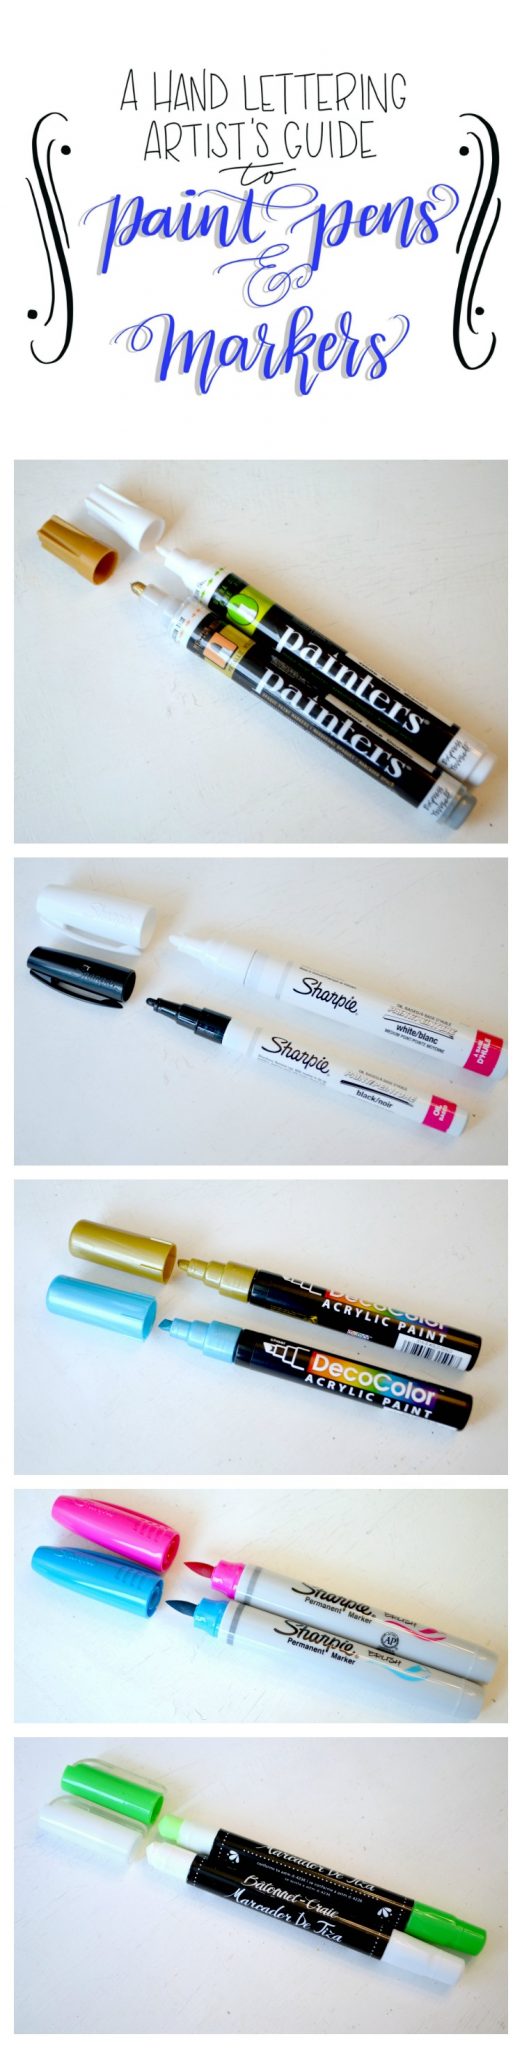 A Lettering Artist's Guide to Paint Pens & Markers